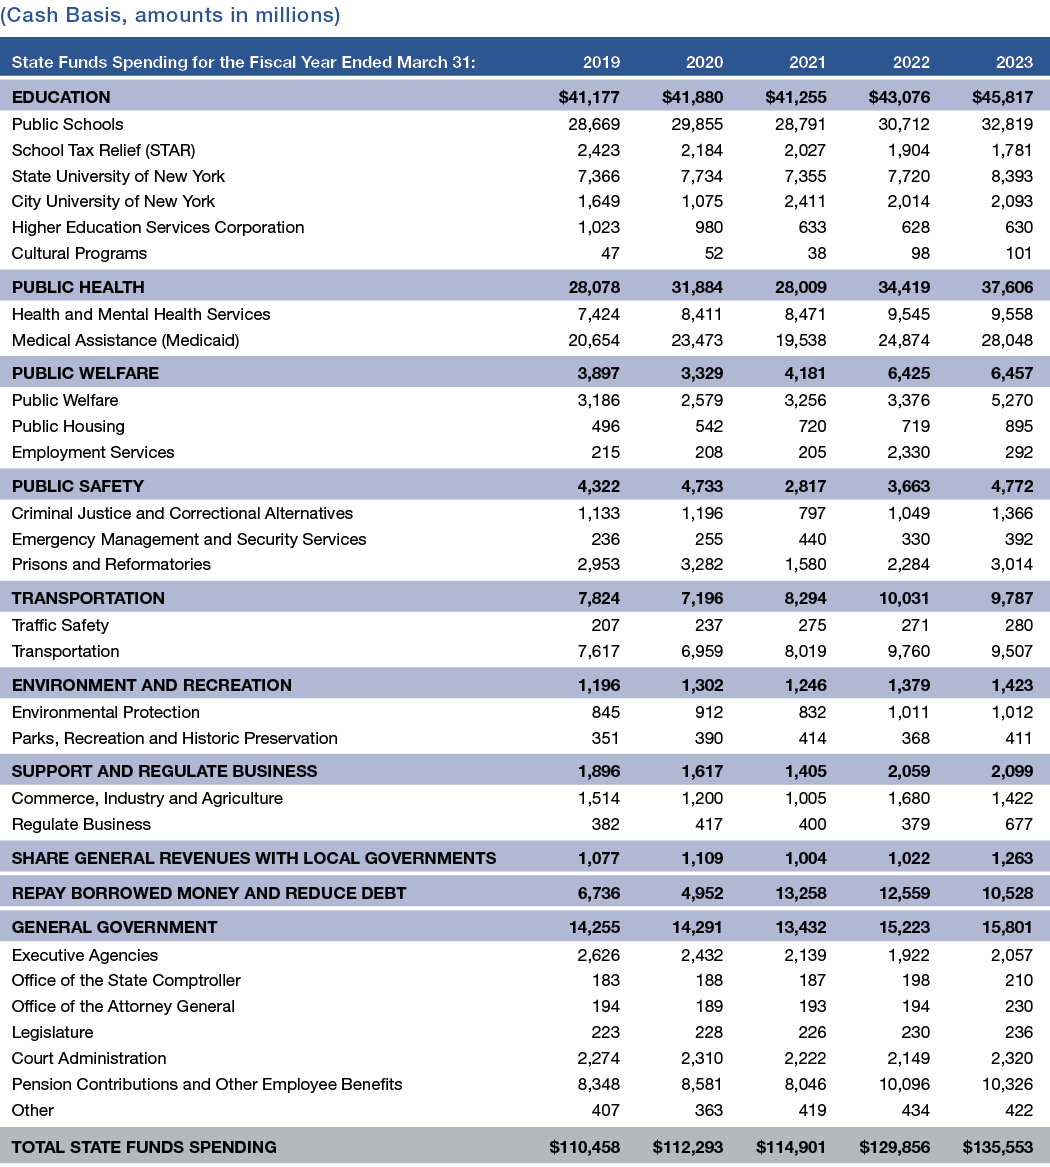 Appendix 1: State Funds Spending by Major Service Function